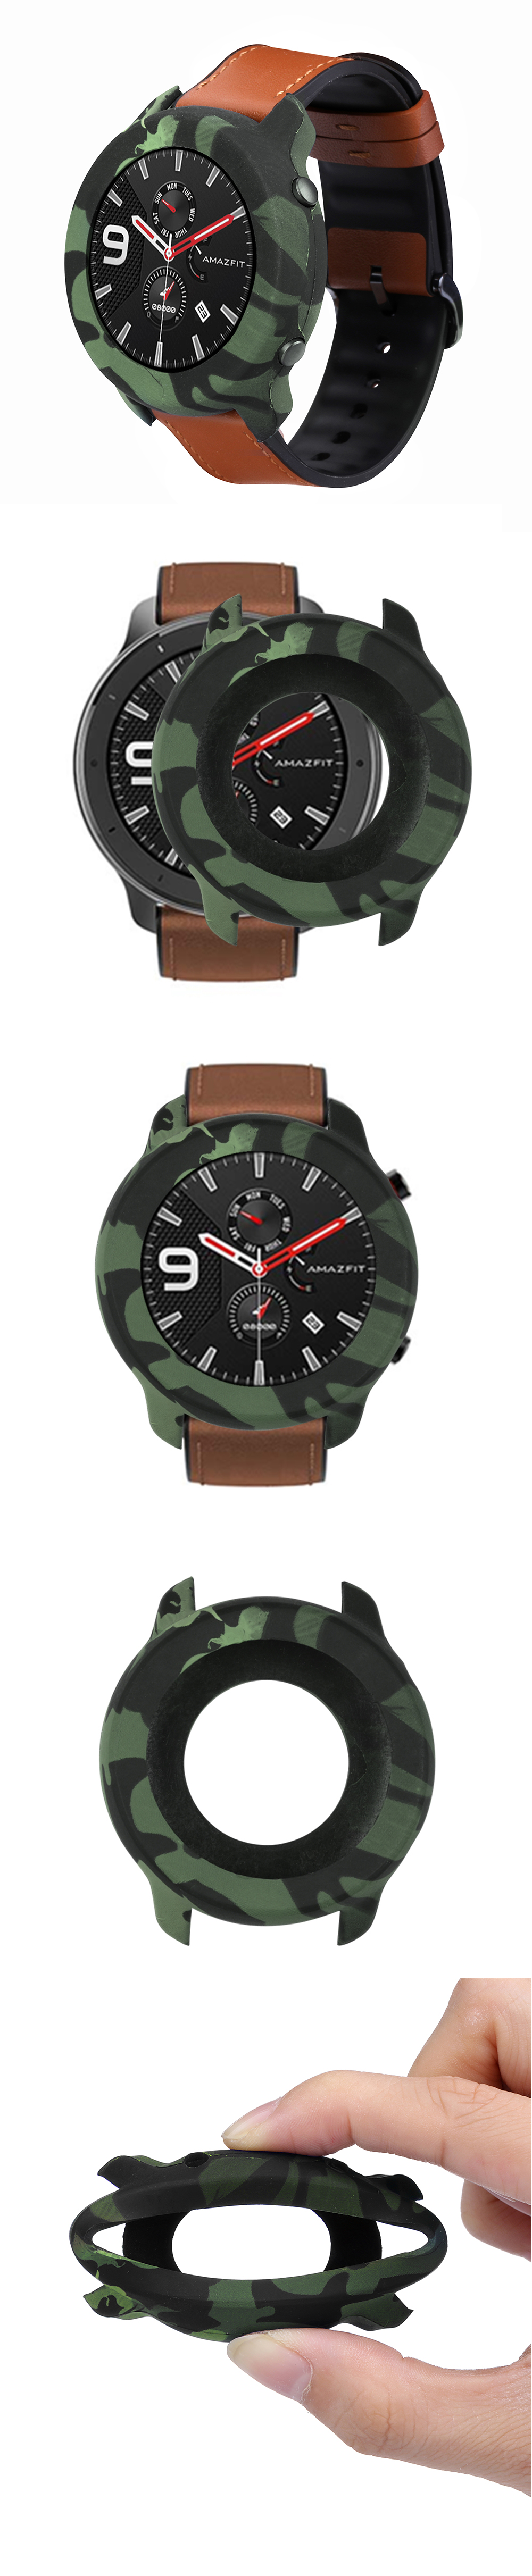 Bakeey-Camouflage-Soft-Silicone-Watch-Case-Cover-Watch-Cover-Screen-Protector-for-AMAZFIT-GTR-47mm-1614263-2